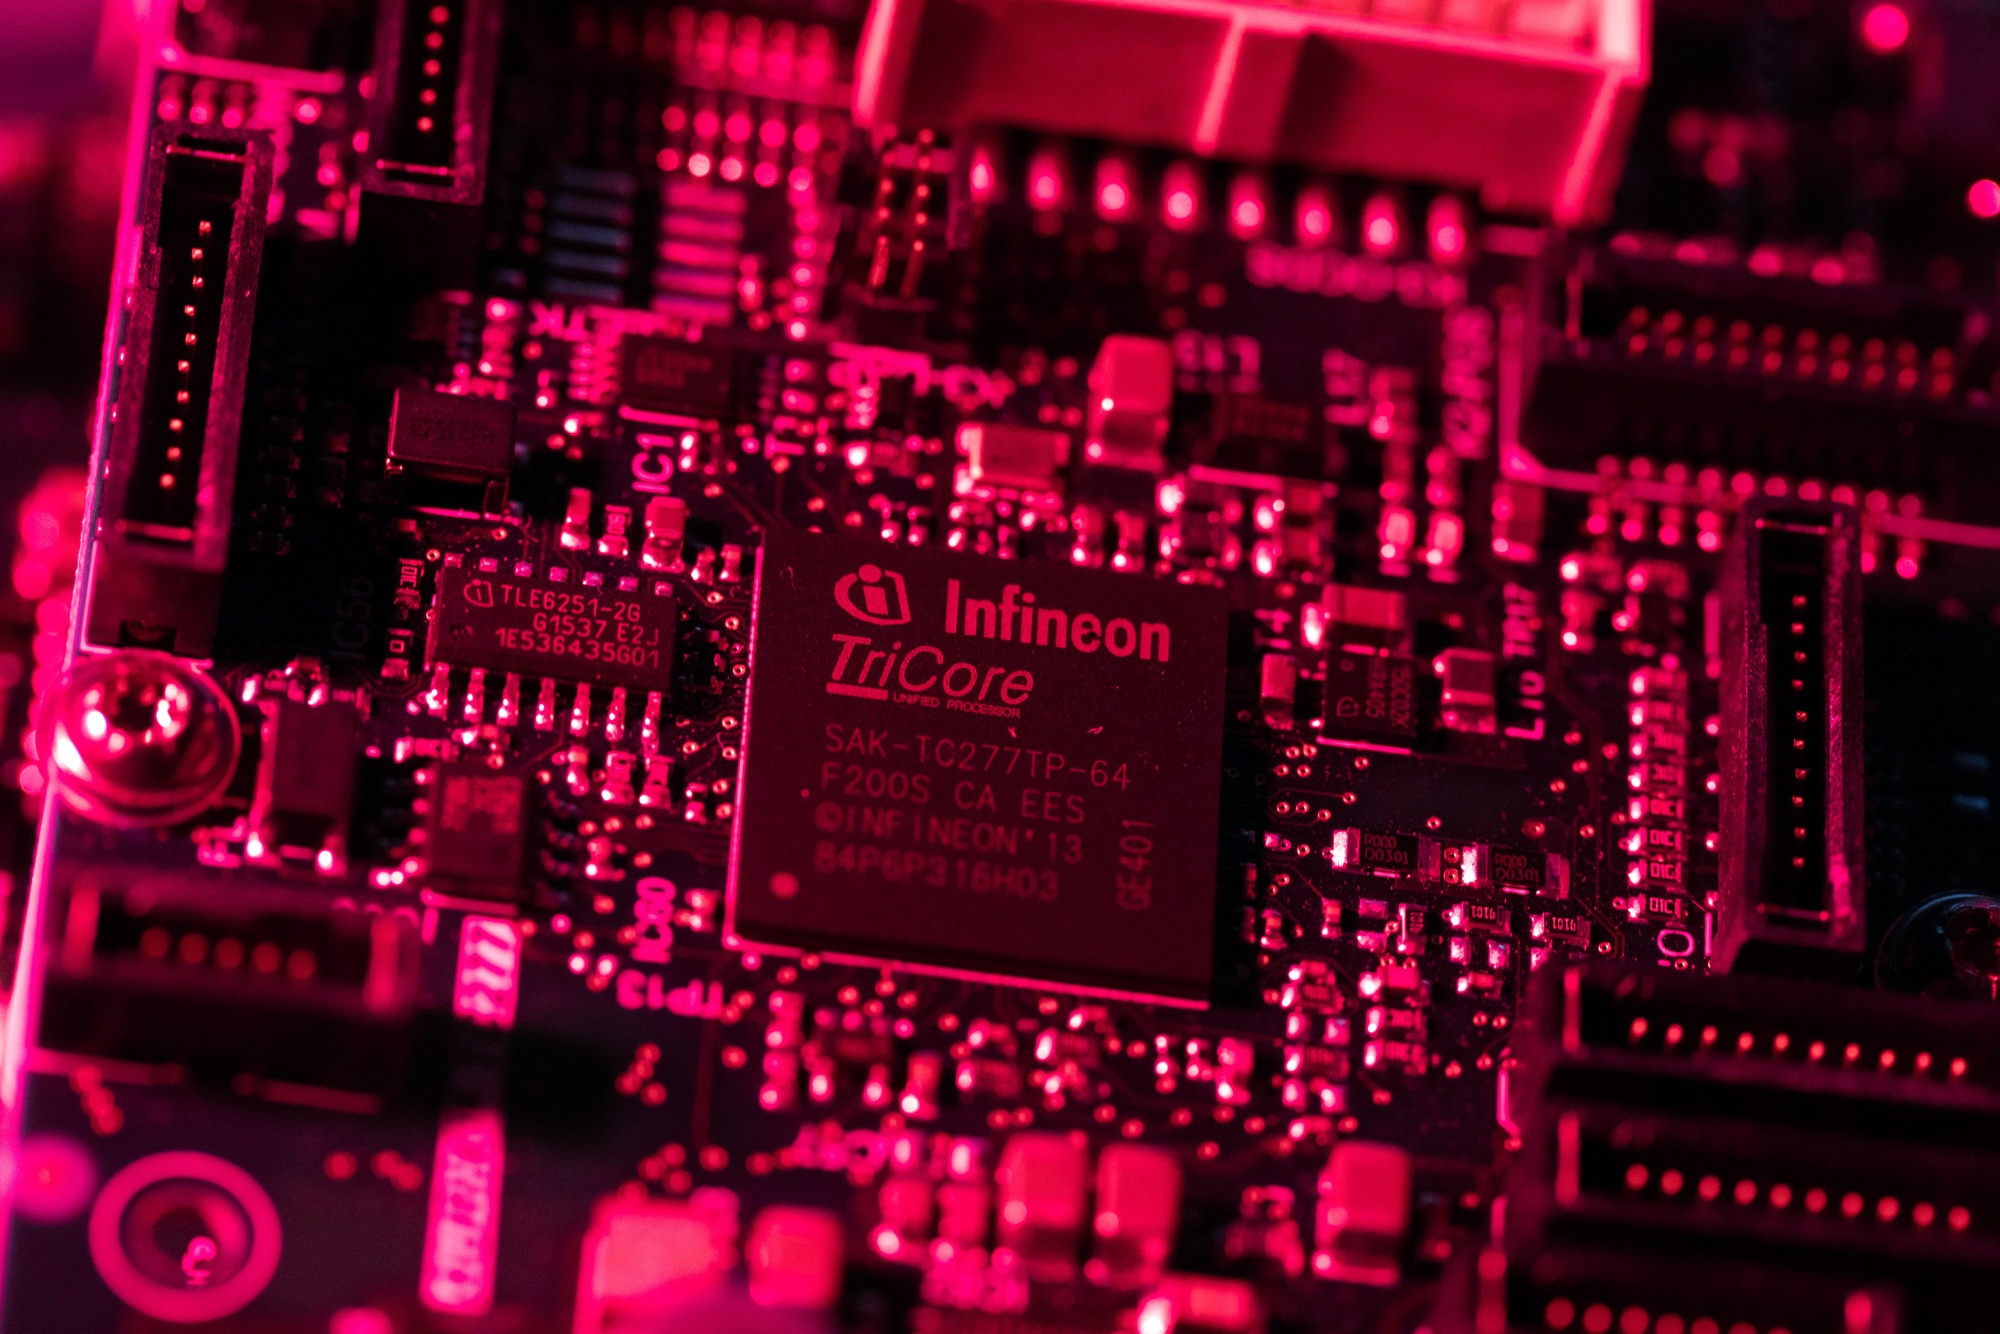 Chipmaker Infineon Technologies AG's Auto Components